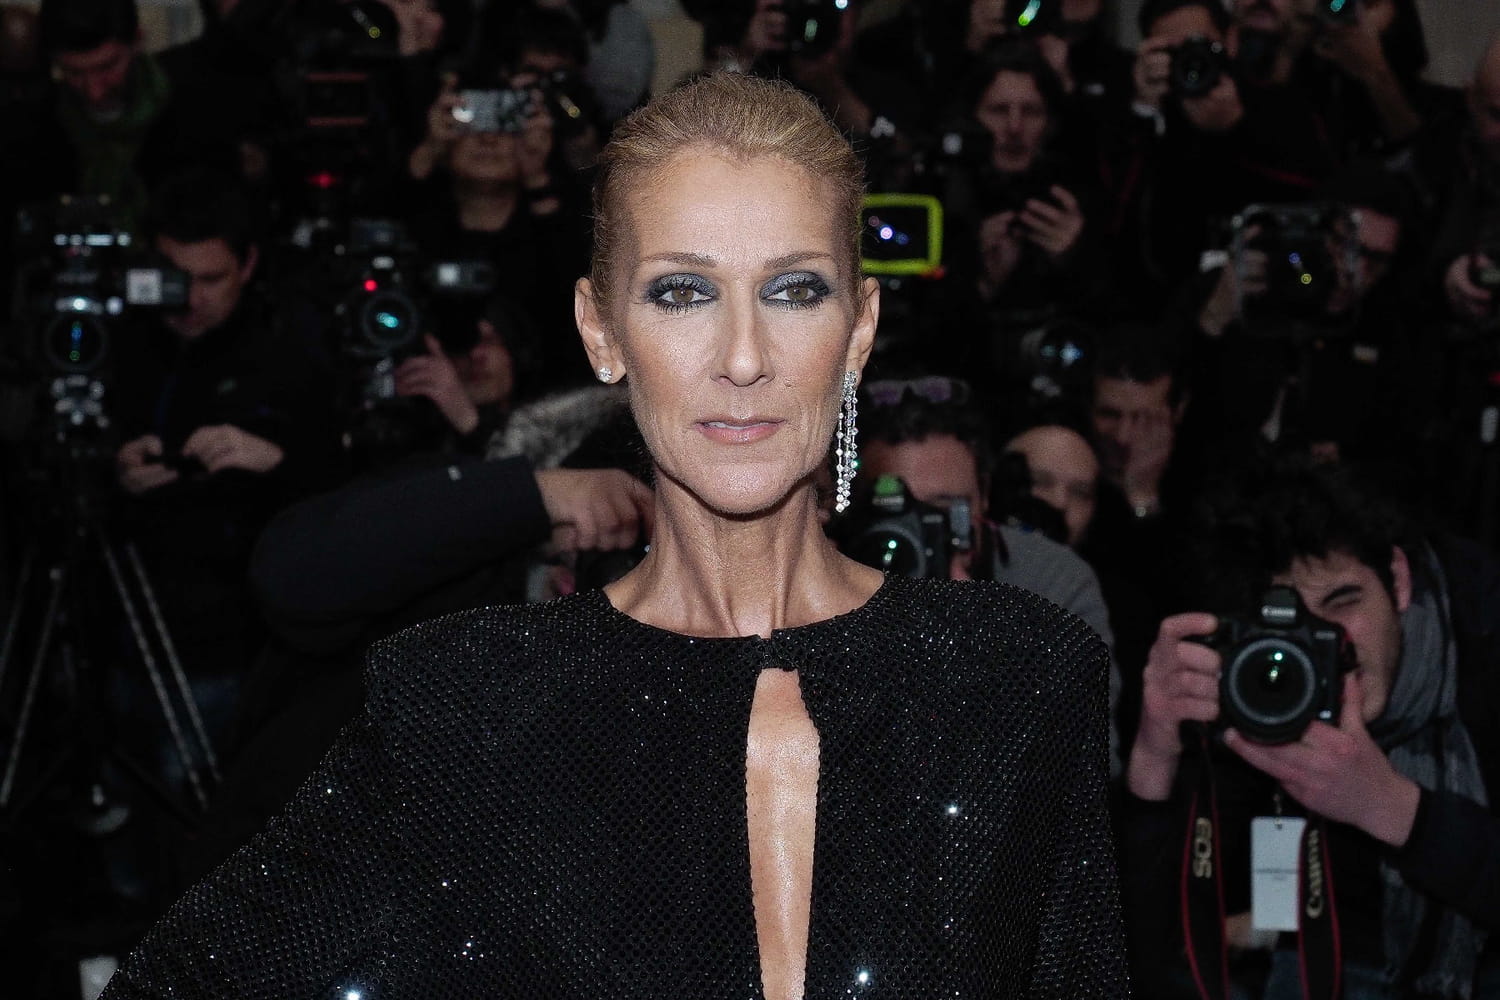 Celine Dion transforms into a femme fatale thanks to an expensive accessory